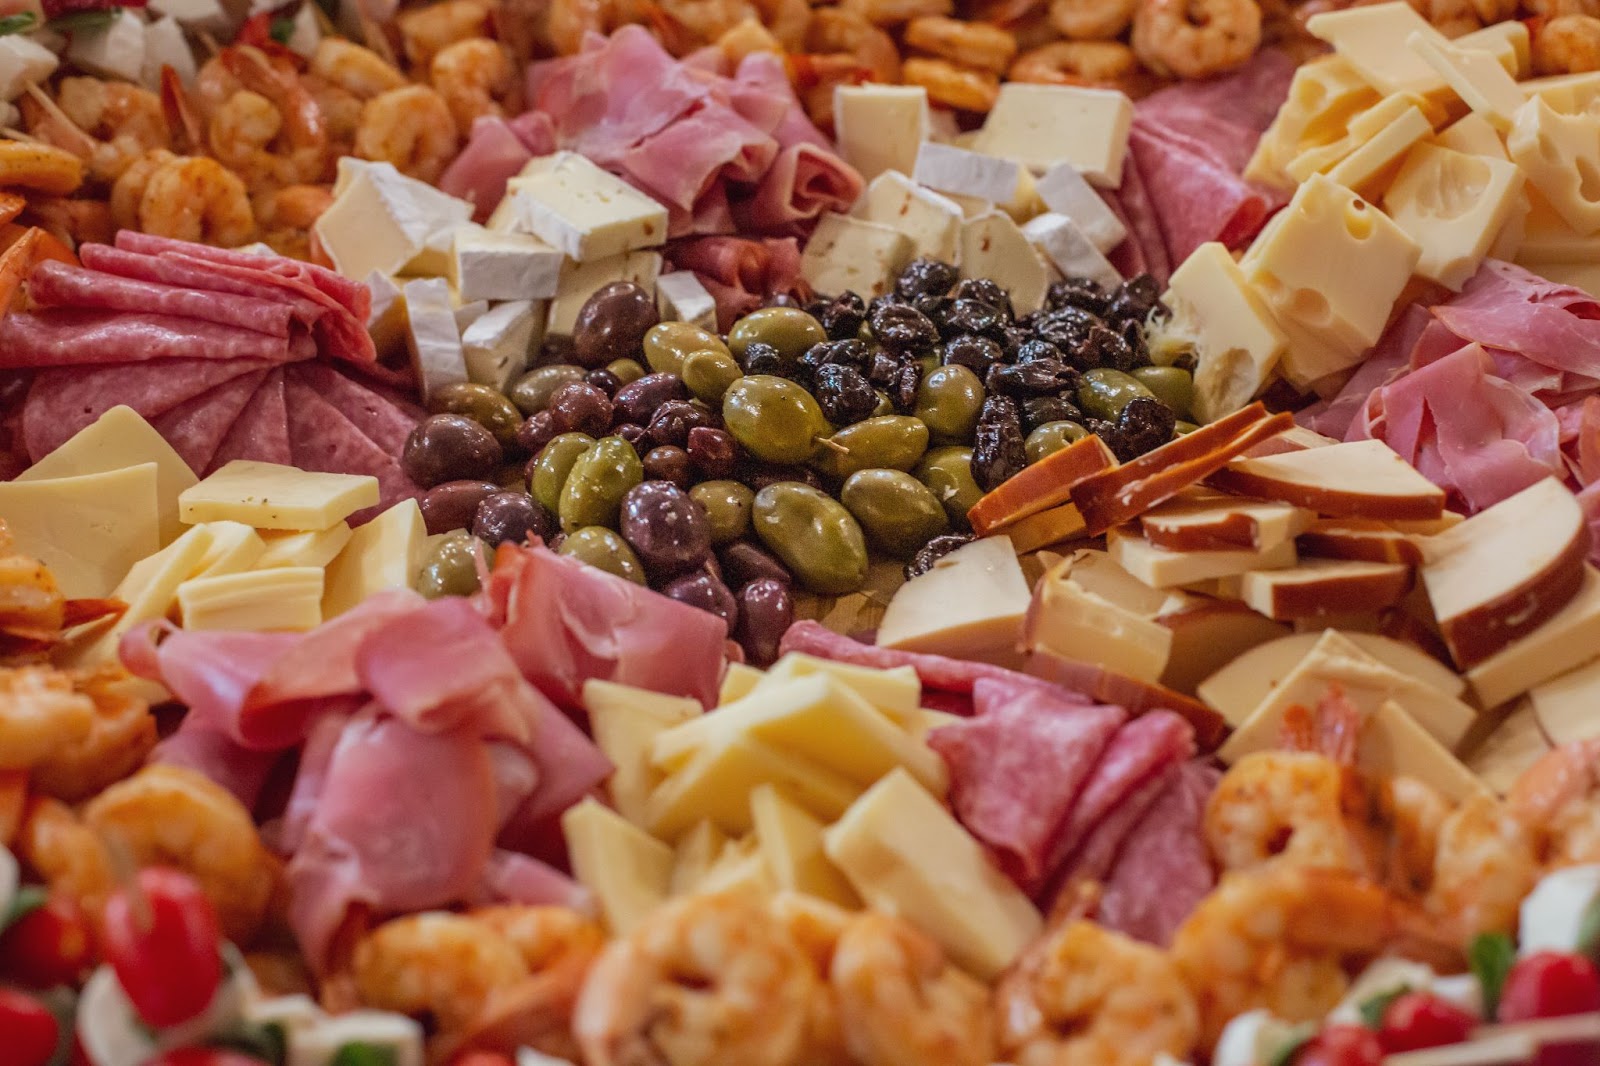 a closeup of a charcuterie spread with meats, cheeses, olives, shrimp and dried fruits